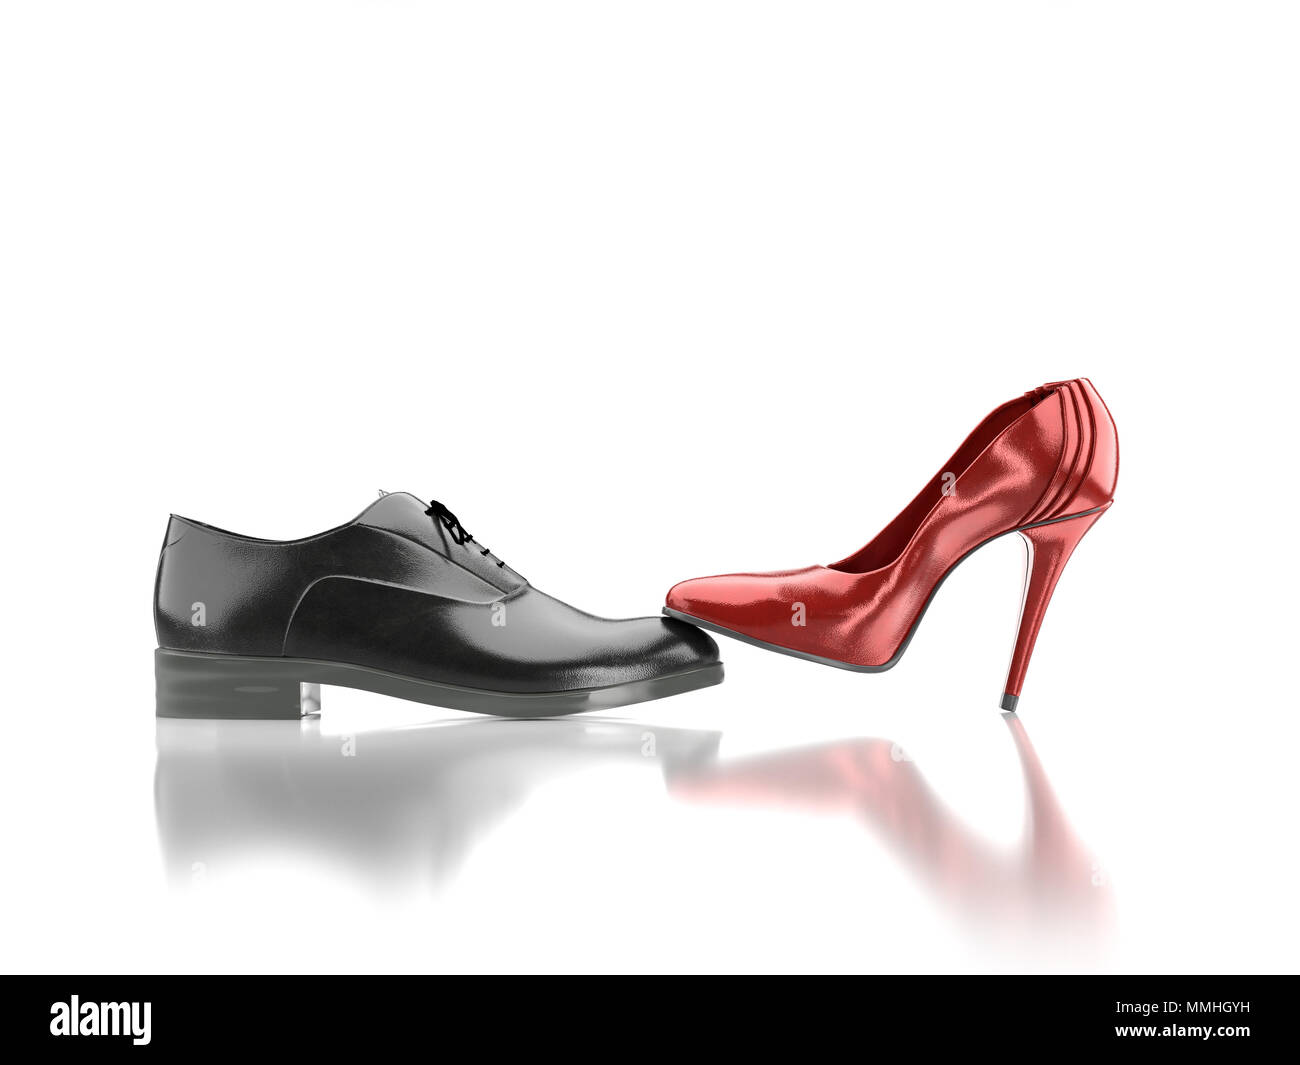 3D render of female red high-hilled shoe pressing against black leather male shoe as female over male domination concept - on whie background Stock Photo